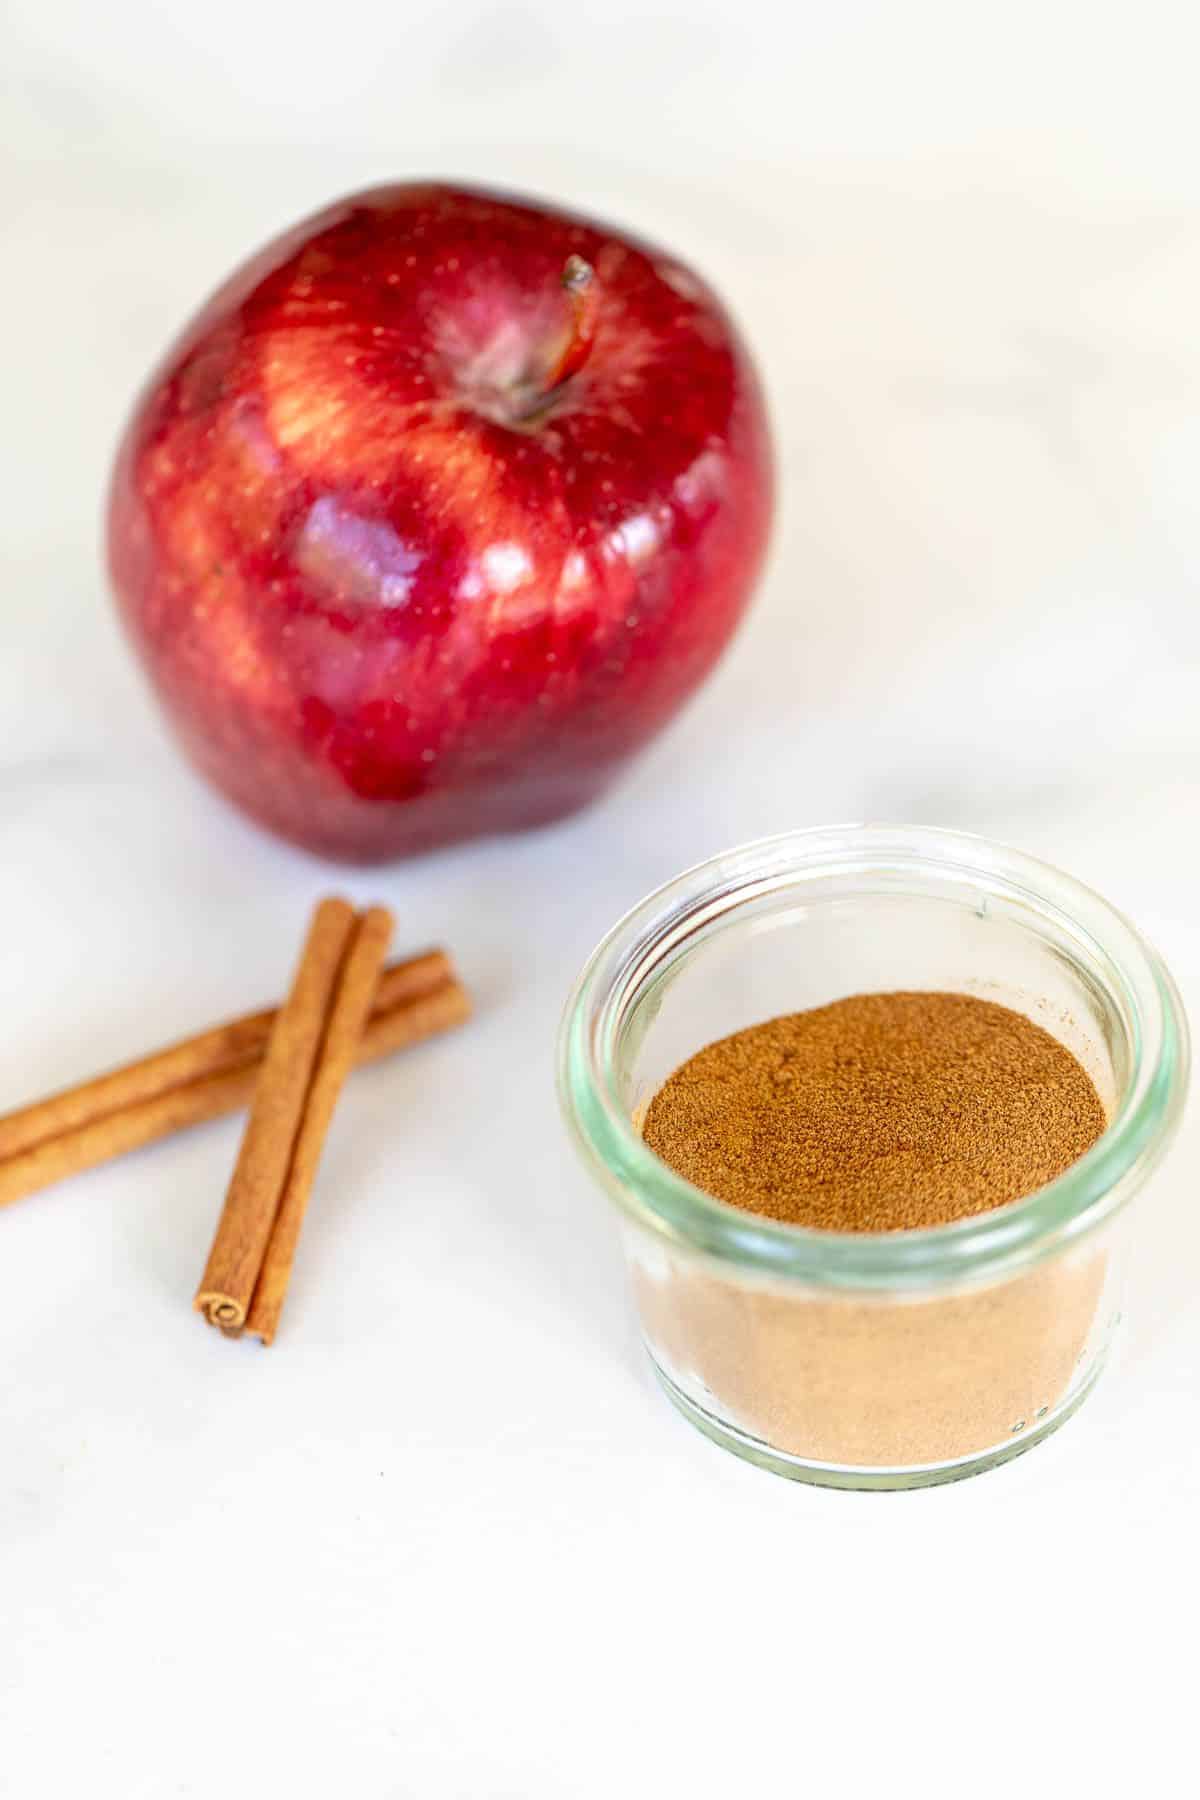 A marble surface with a small jar of apple pie spice, cinnamon sticks and an apple to the side.